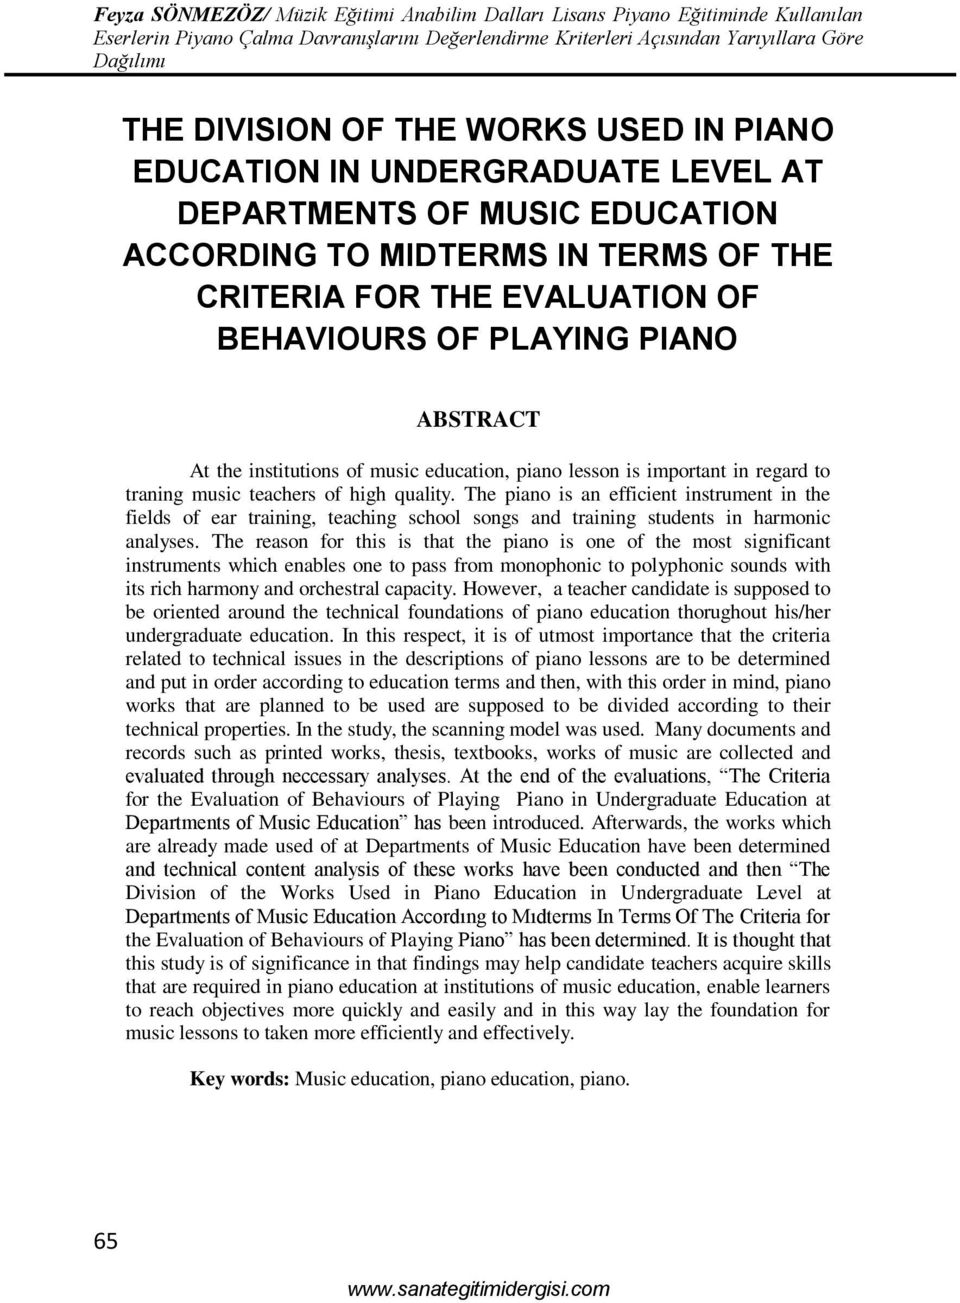 The piano is an efficient instrument in the fields of ear training, teaching school songs and training students in harmonic analyses.